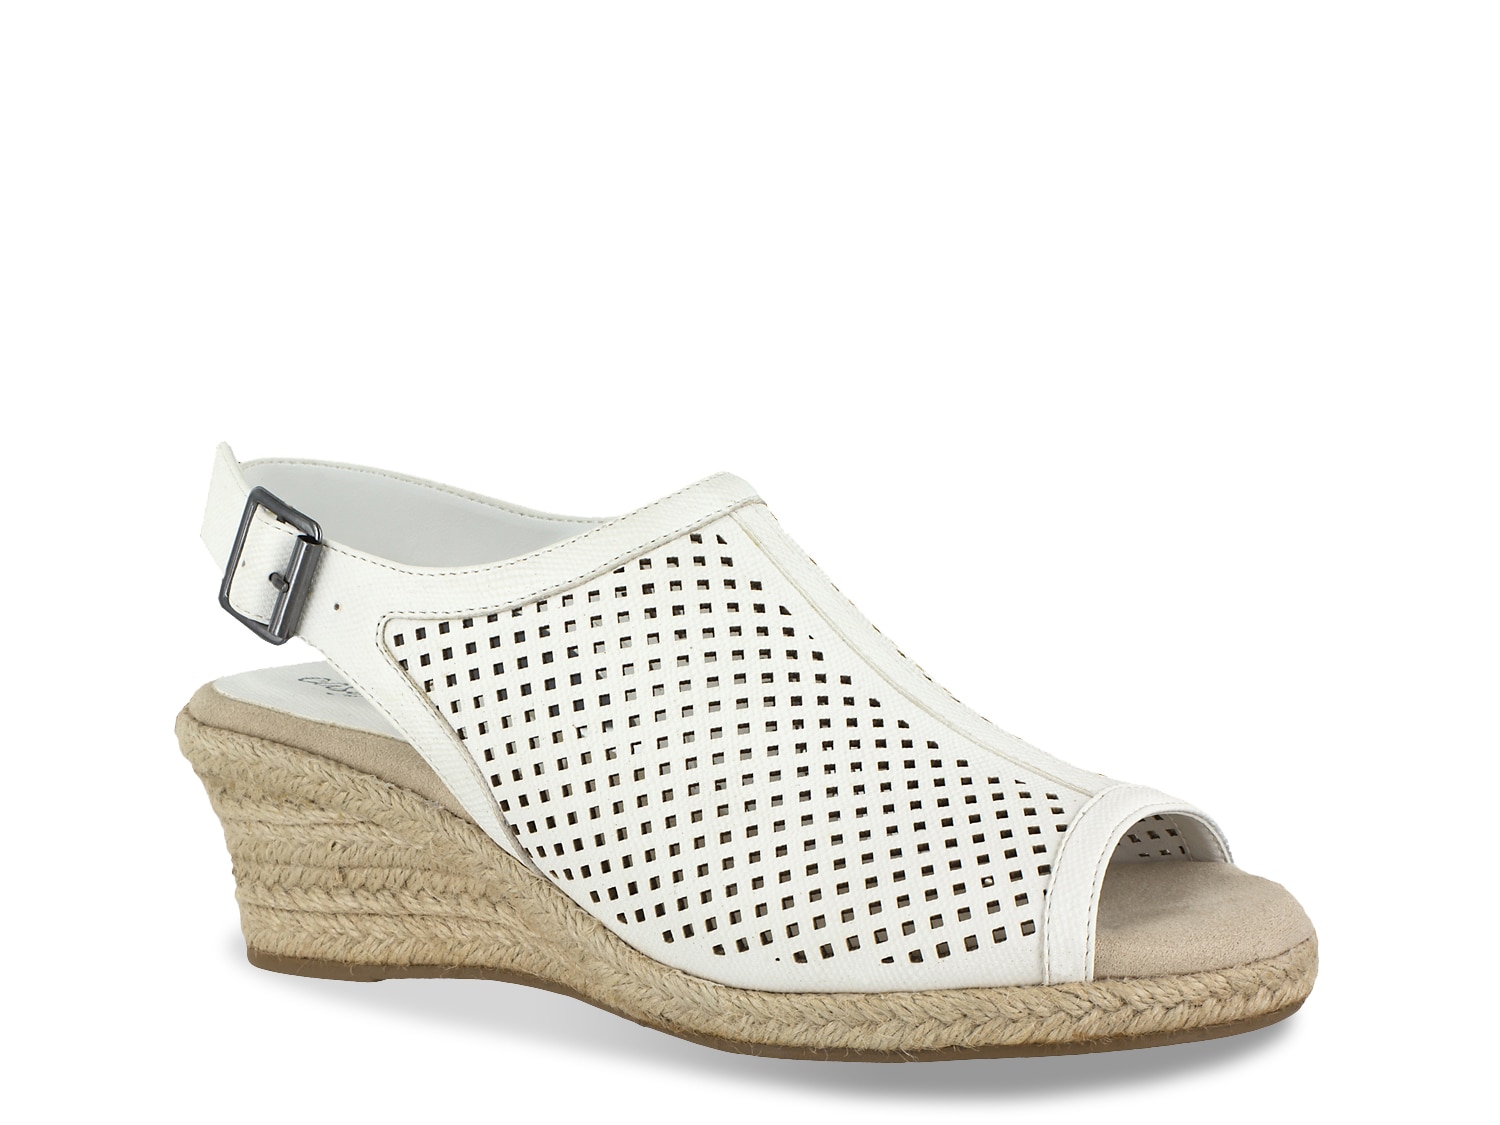 easy street espadrille shoes